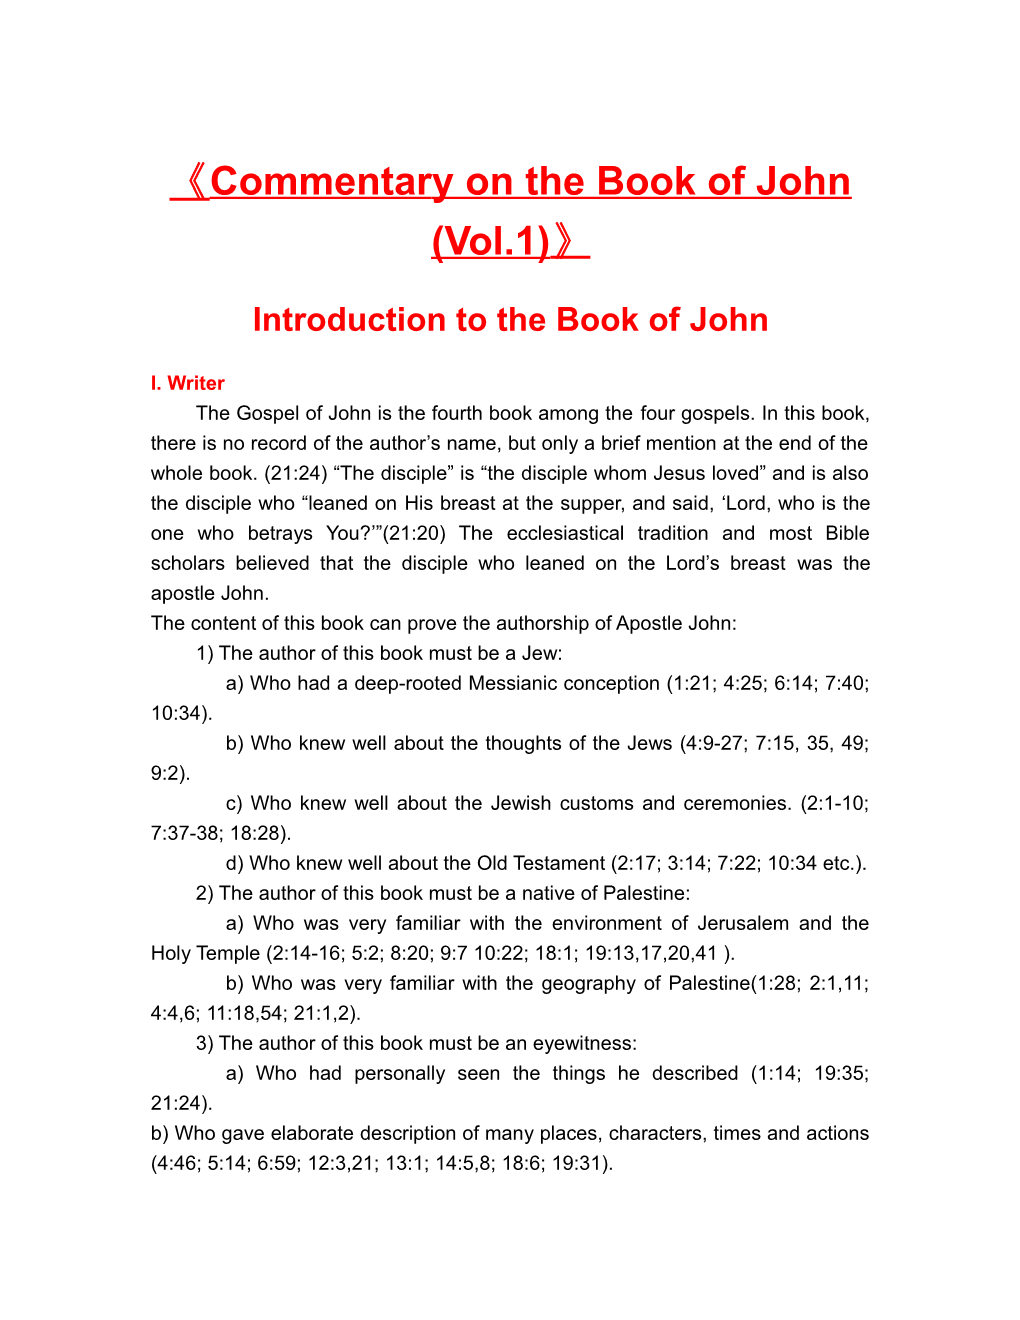 Commentary on the Book of John (Vol.1)